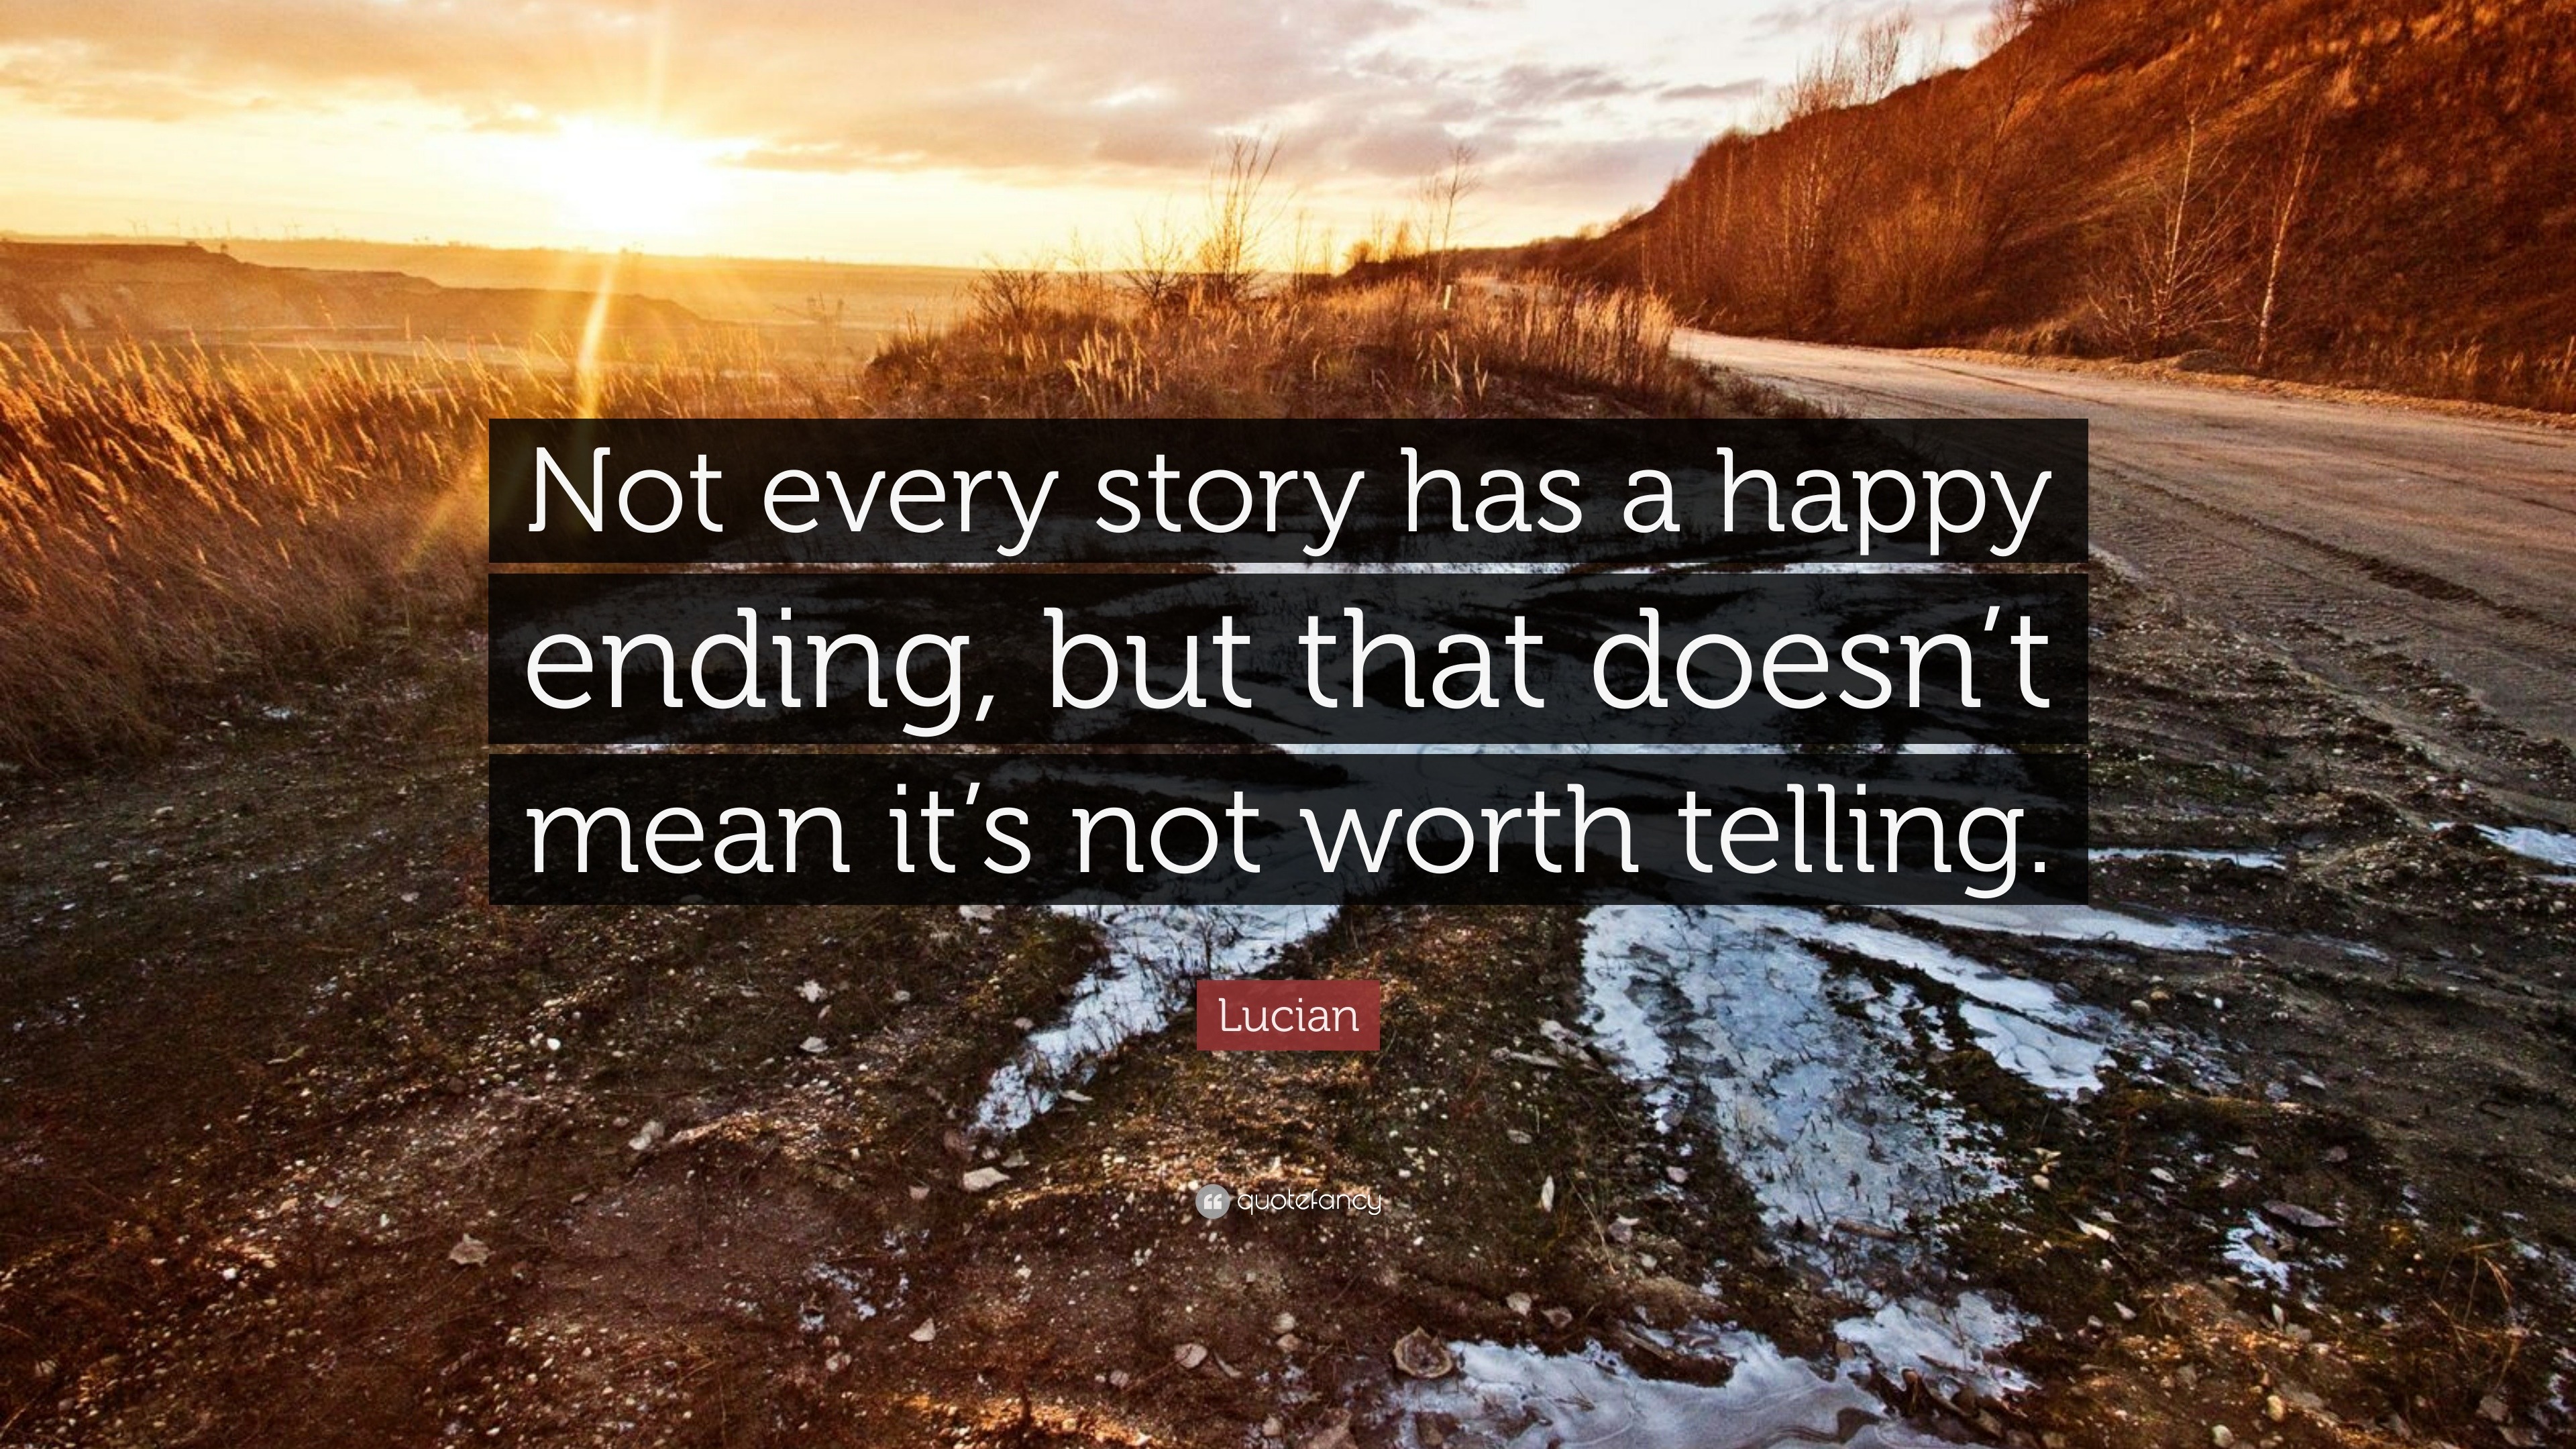 Lucian Quote “Not every story has a happy ending but that doesn